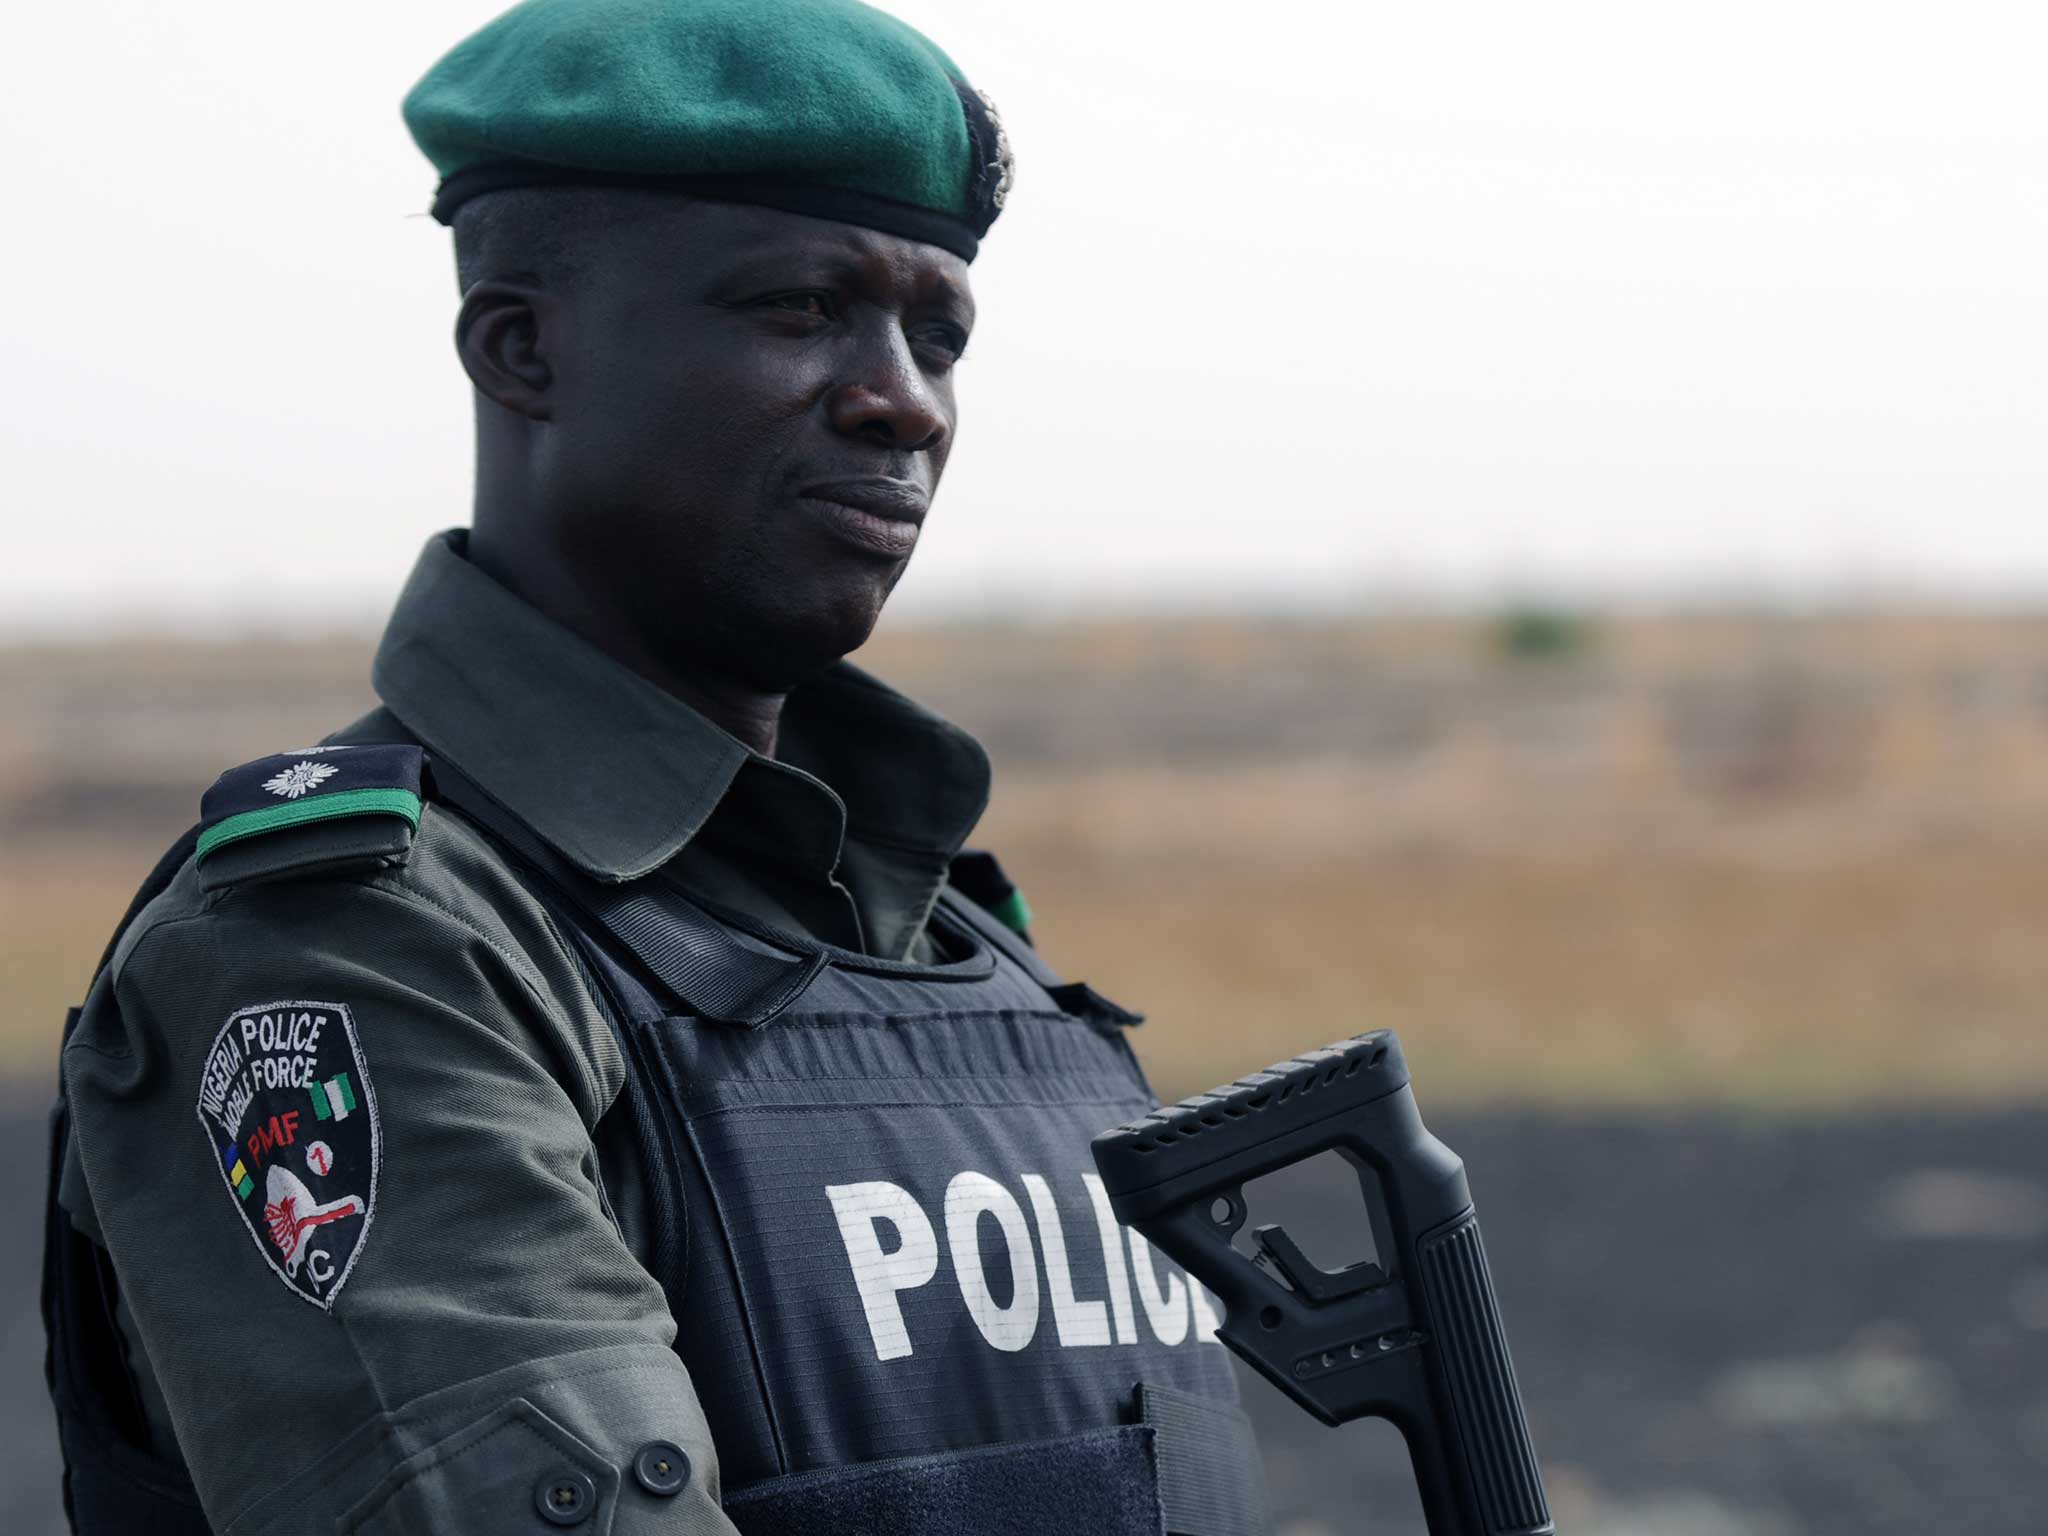 There has been a mass breakout from a Nigerian jail